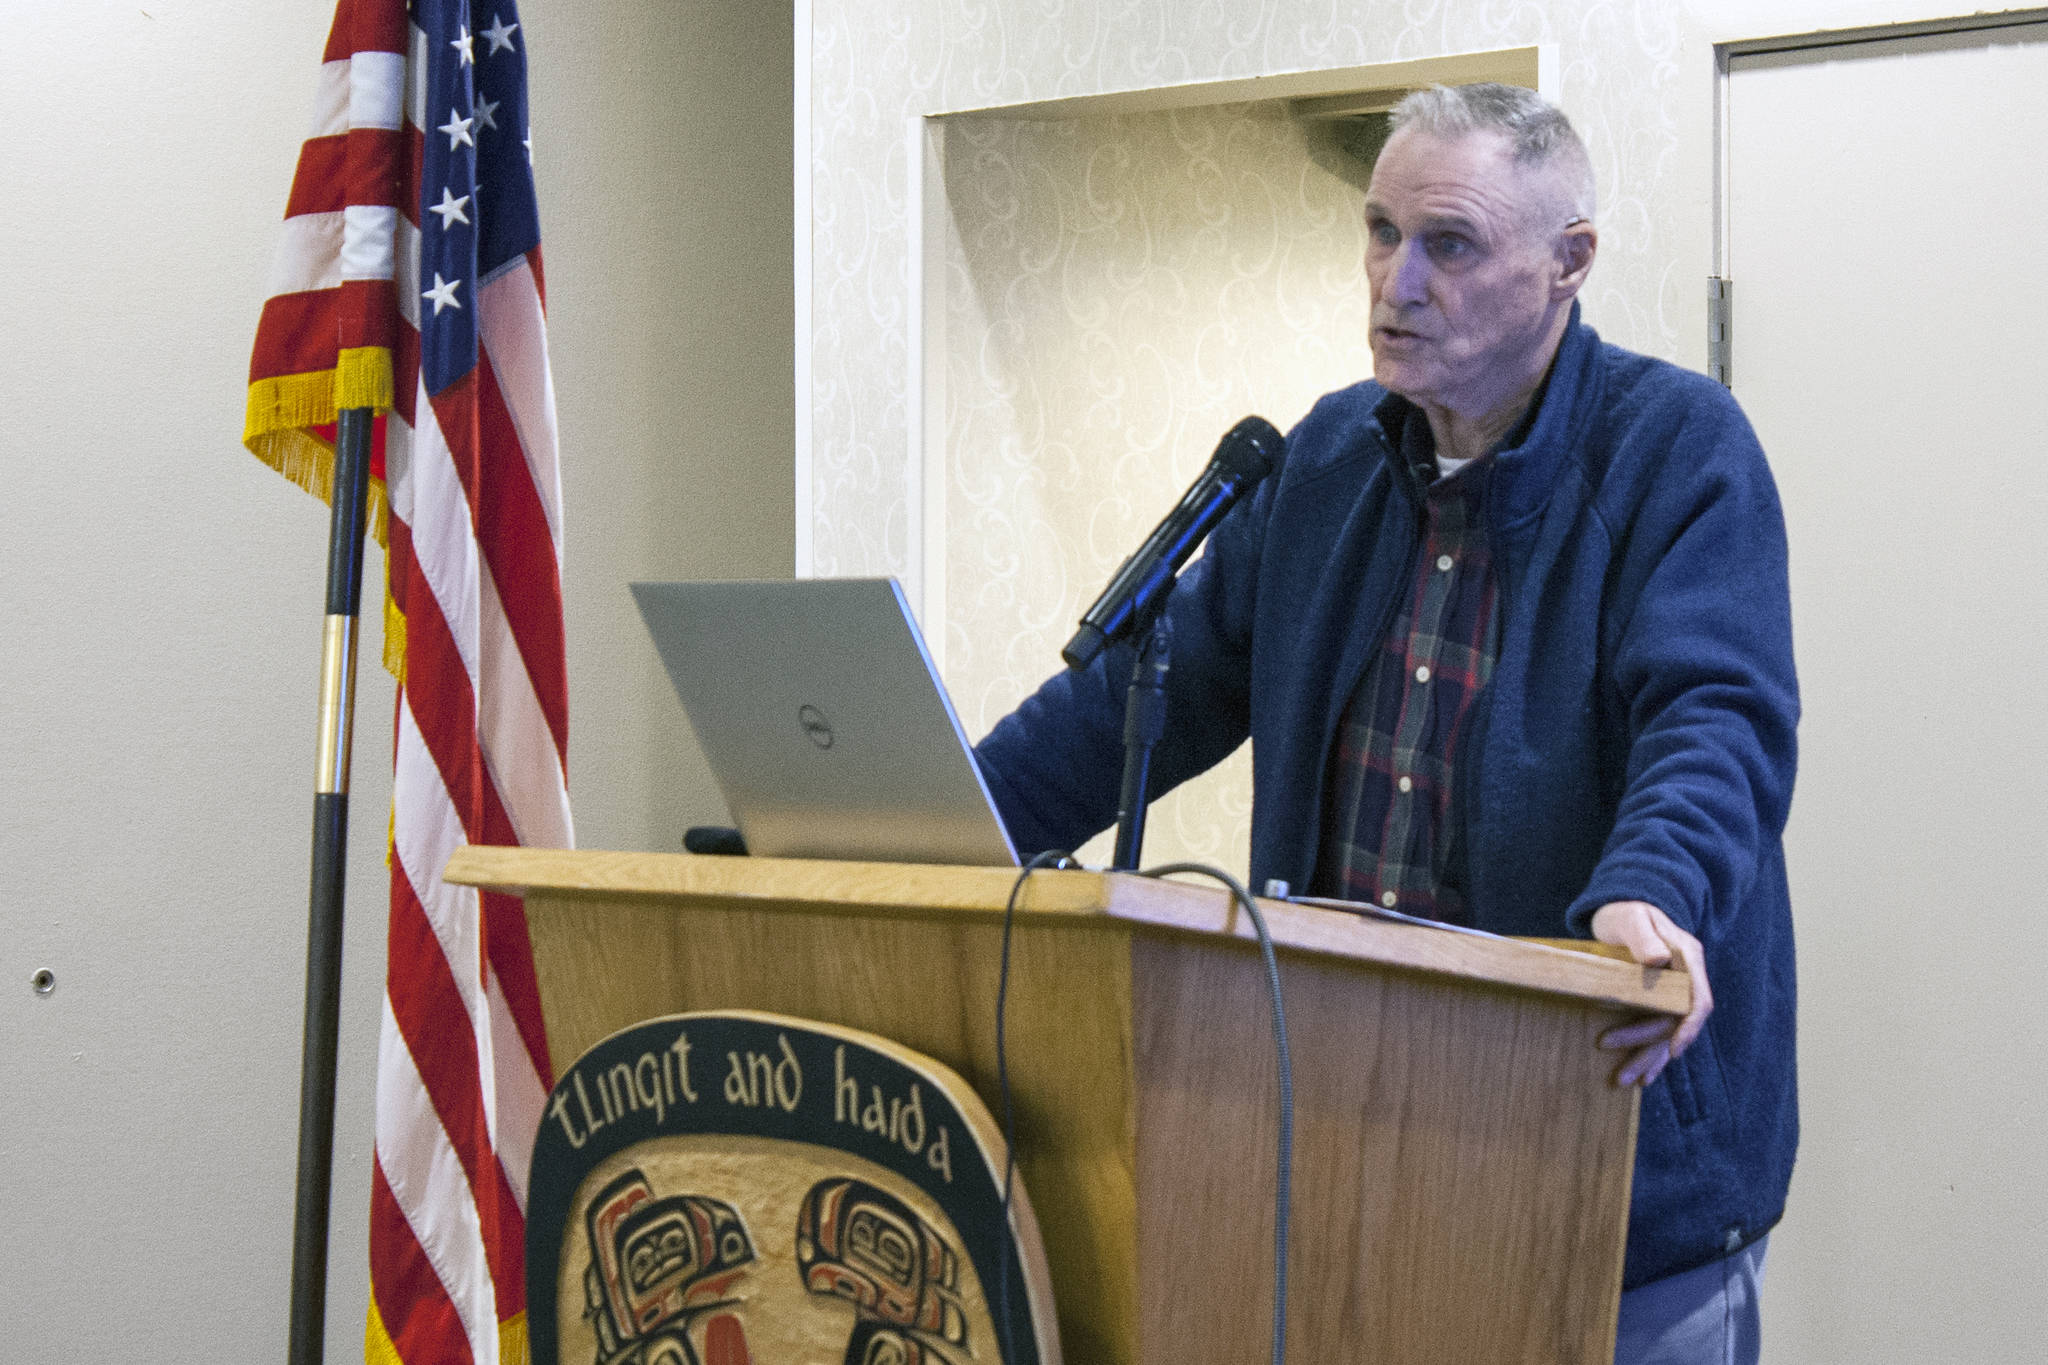 Bill Corbus, former revenue commissioner and past president of Alaska Electric Light and Power Company speaks Thursday at a Greater Juneau Chamber of Commerce meeting at Elizabeth Peratrovich Hall. (Ben Hohenstatt | Juneau Empire)